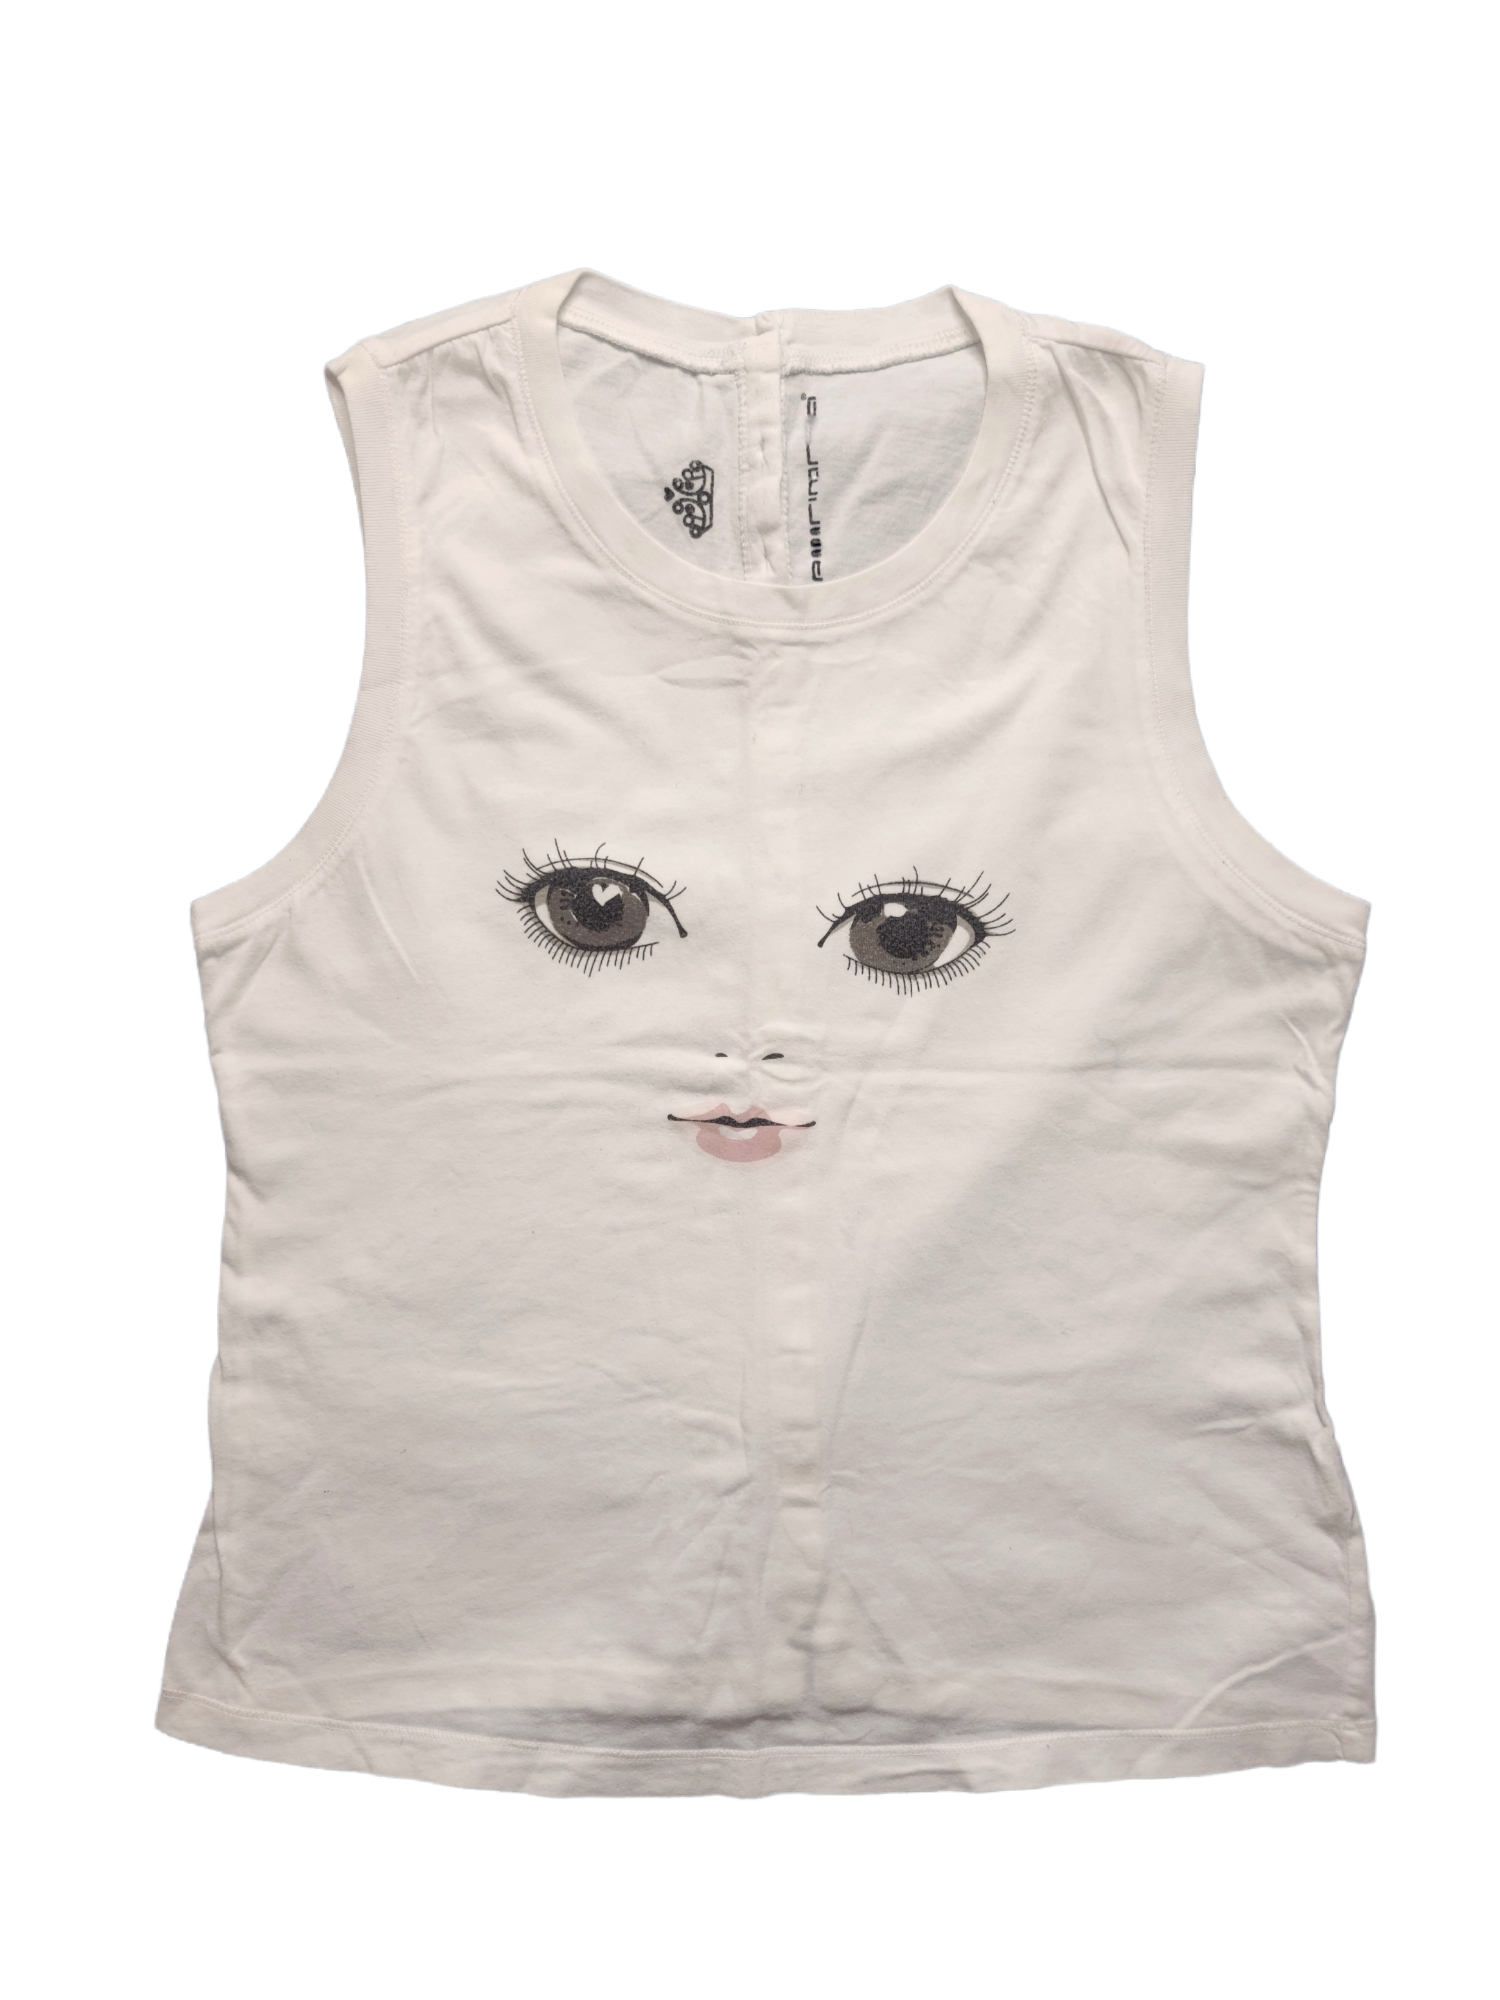 Archive fashion cyber y2k tank top imprimé manga printed anime face 2000s 